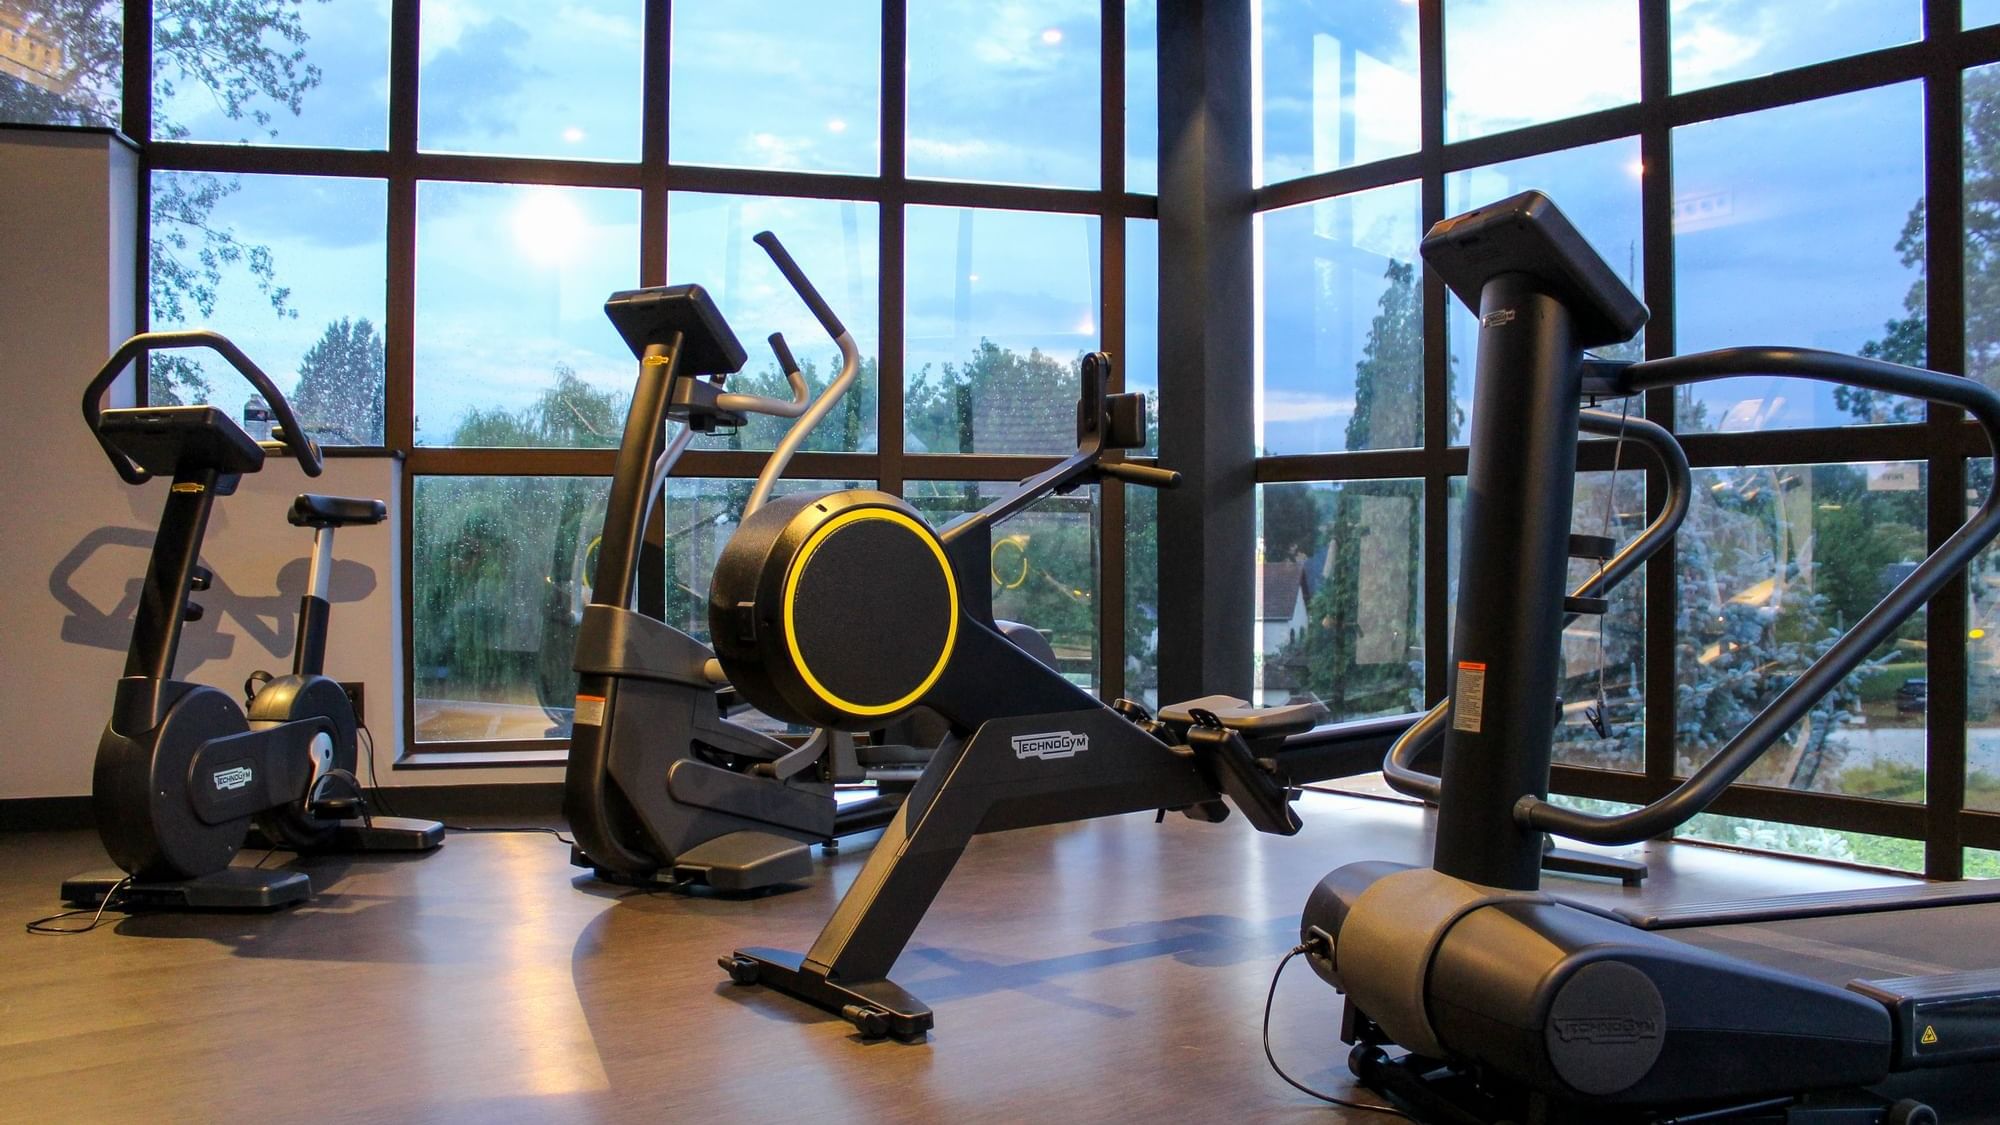 Skillrow & other gym equipment at the gym in Originals Hotels